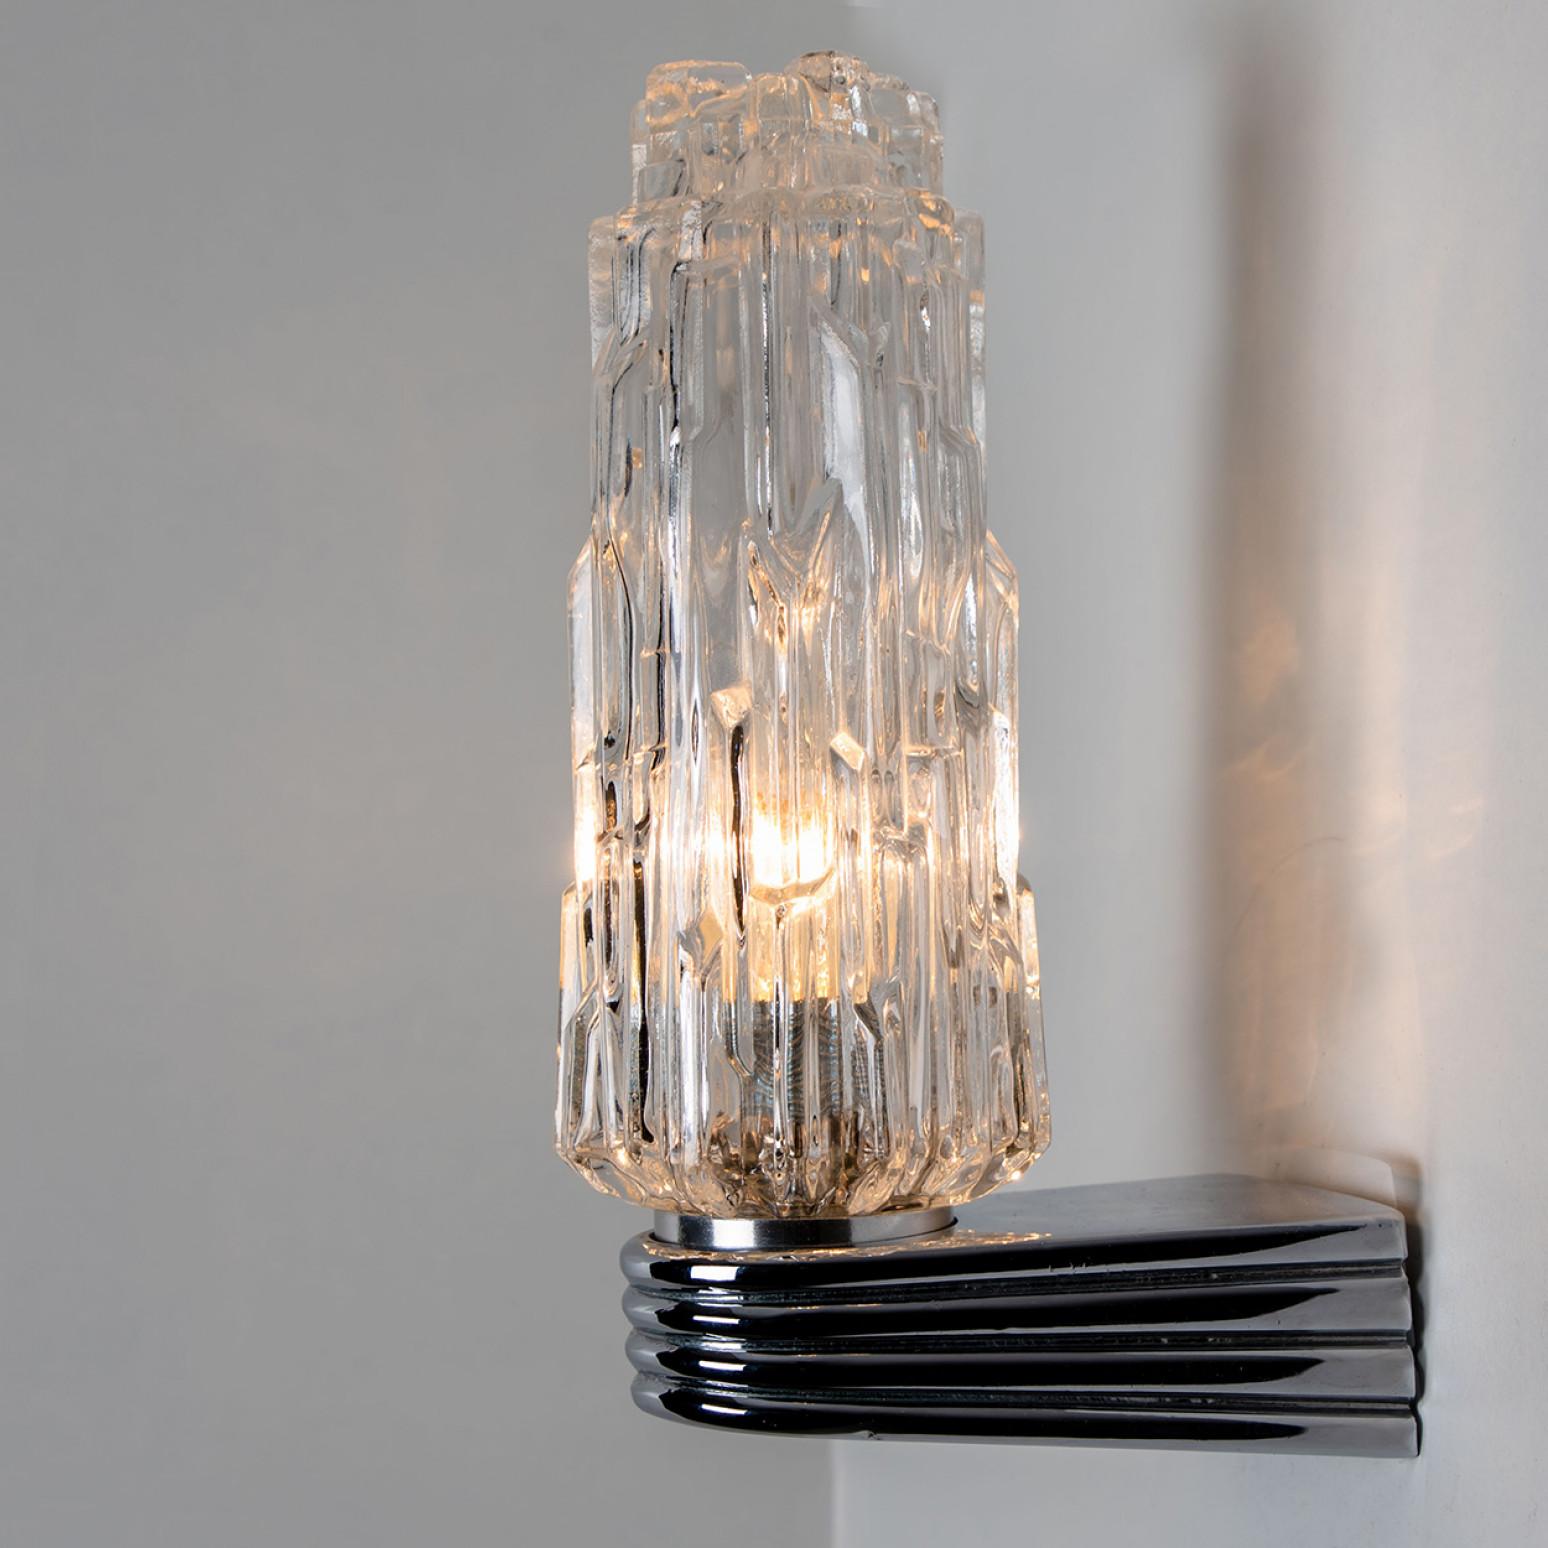 Clear glass light with a chrome base, the glass is textured and tapered from the top, all the way down to the base. A wonderful shape. Real statement pieces.

Dimensions:
Height: 9.84